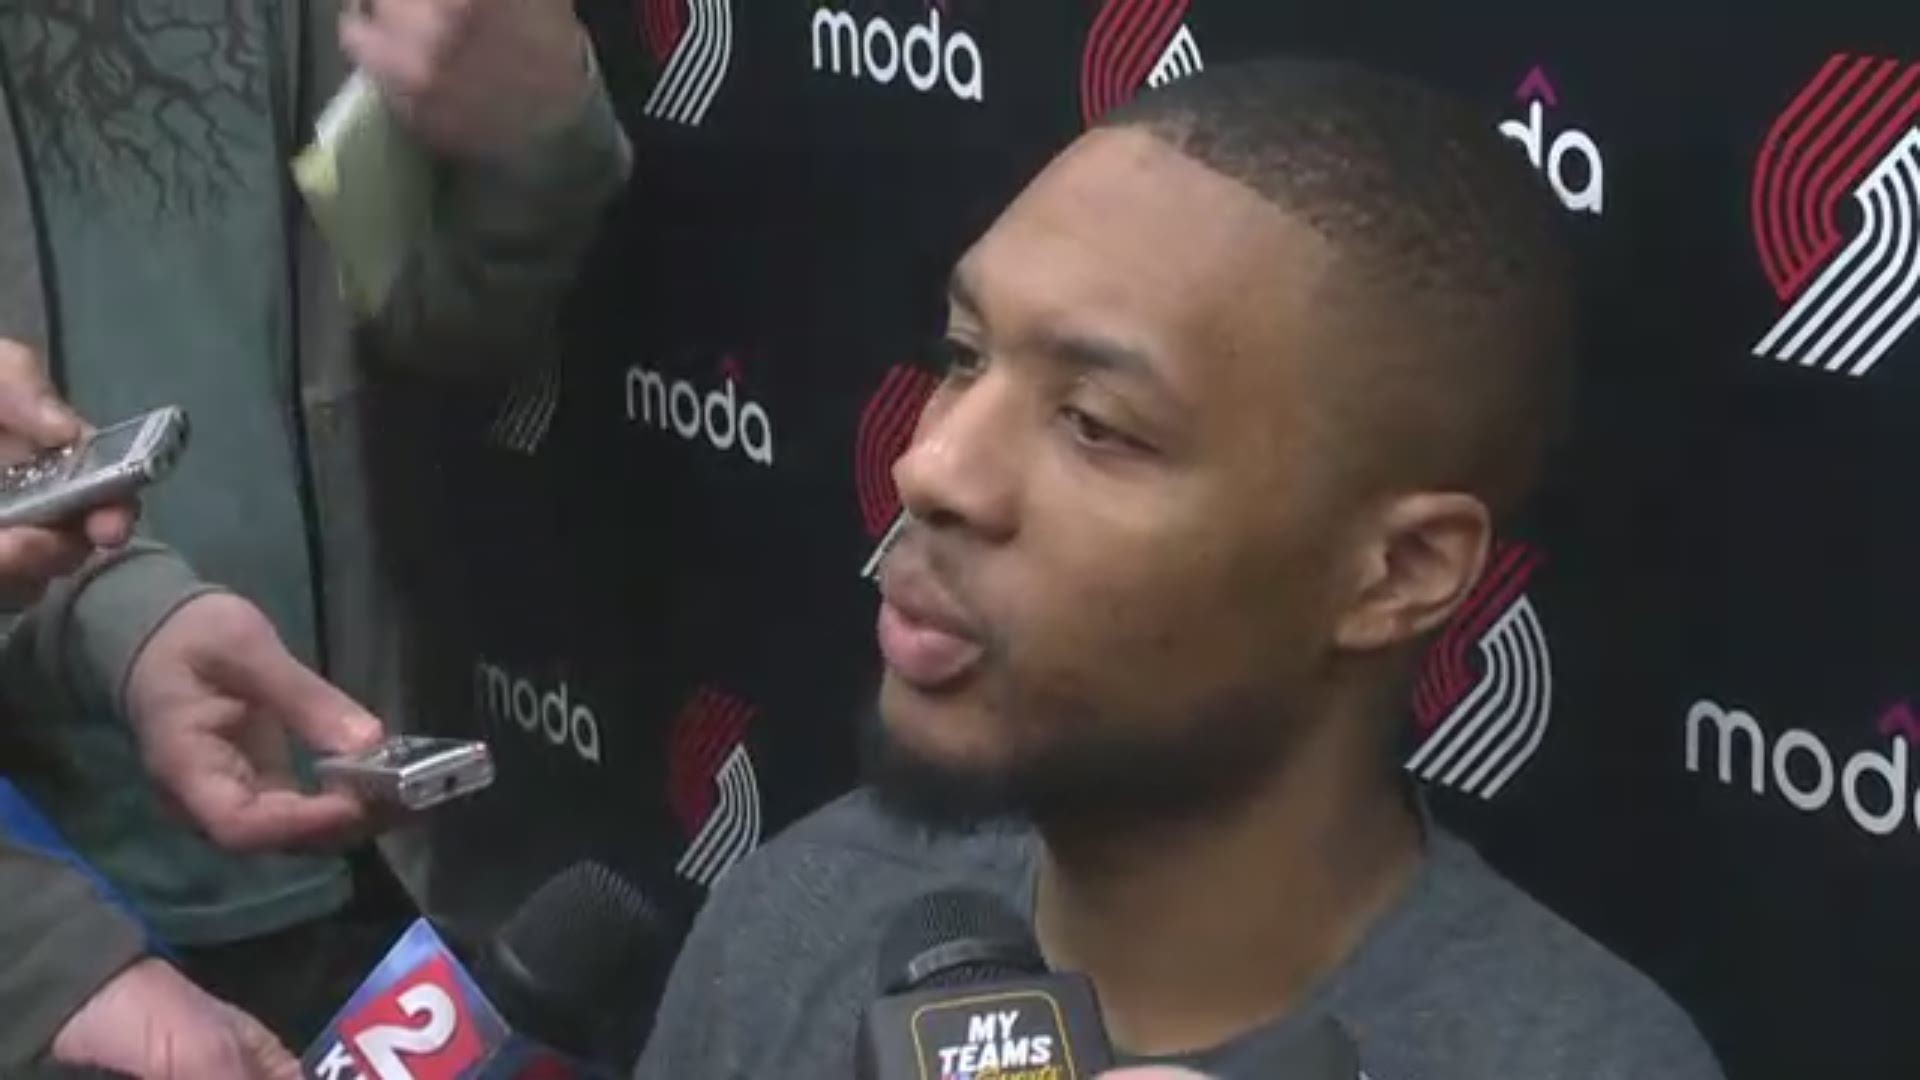 Damian Lillard said while the attention his shot is getting across the world is great, he’s ready to focus on what’s next.